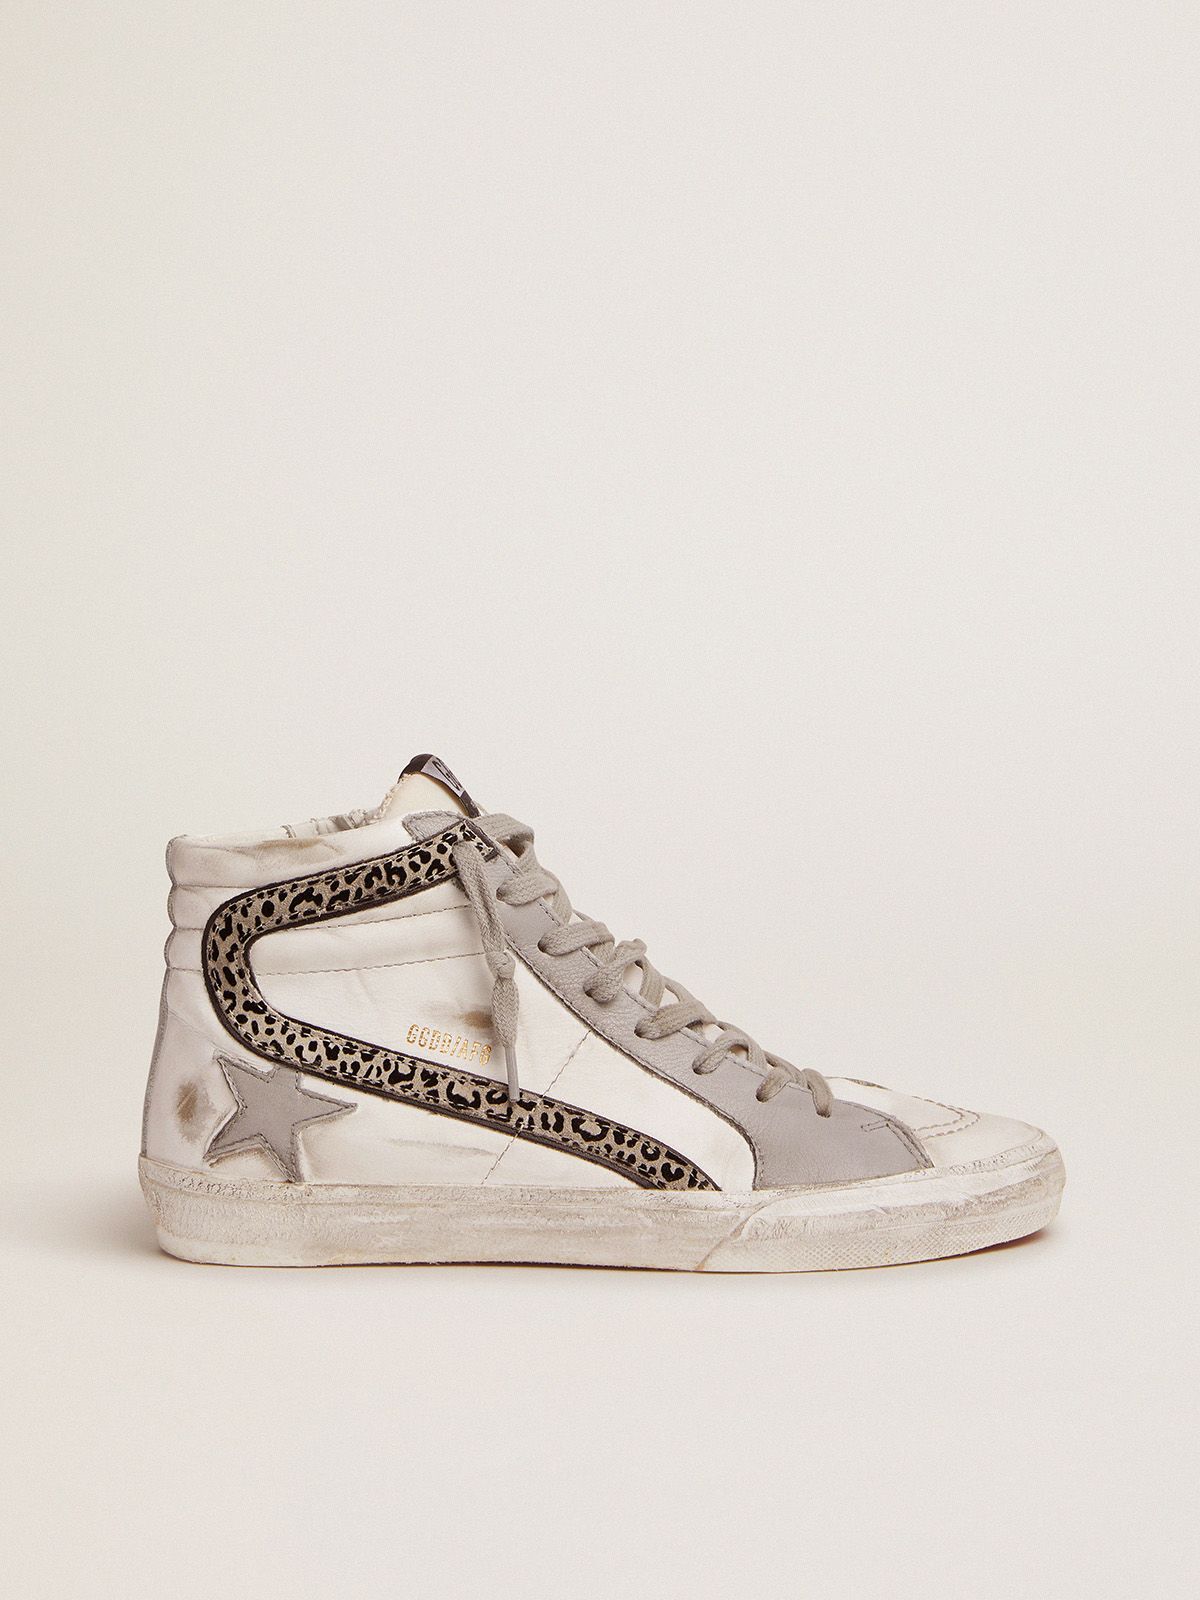 golden goose white suede leopard-print with Slide and leather flash sneakers gray upper